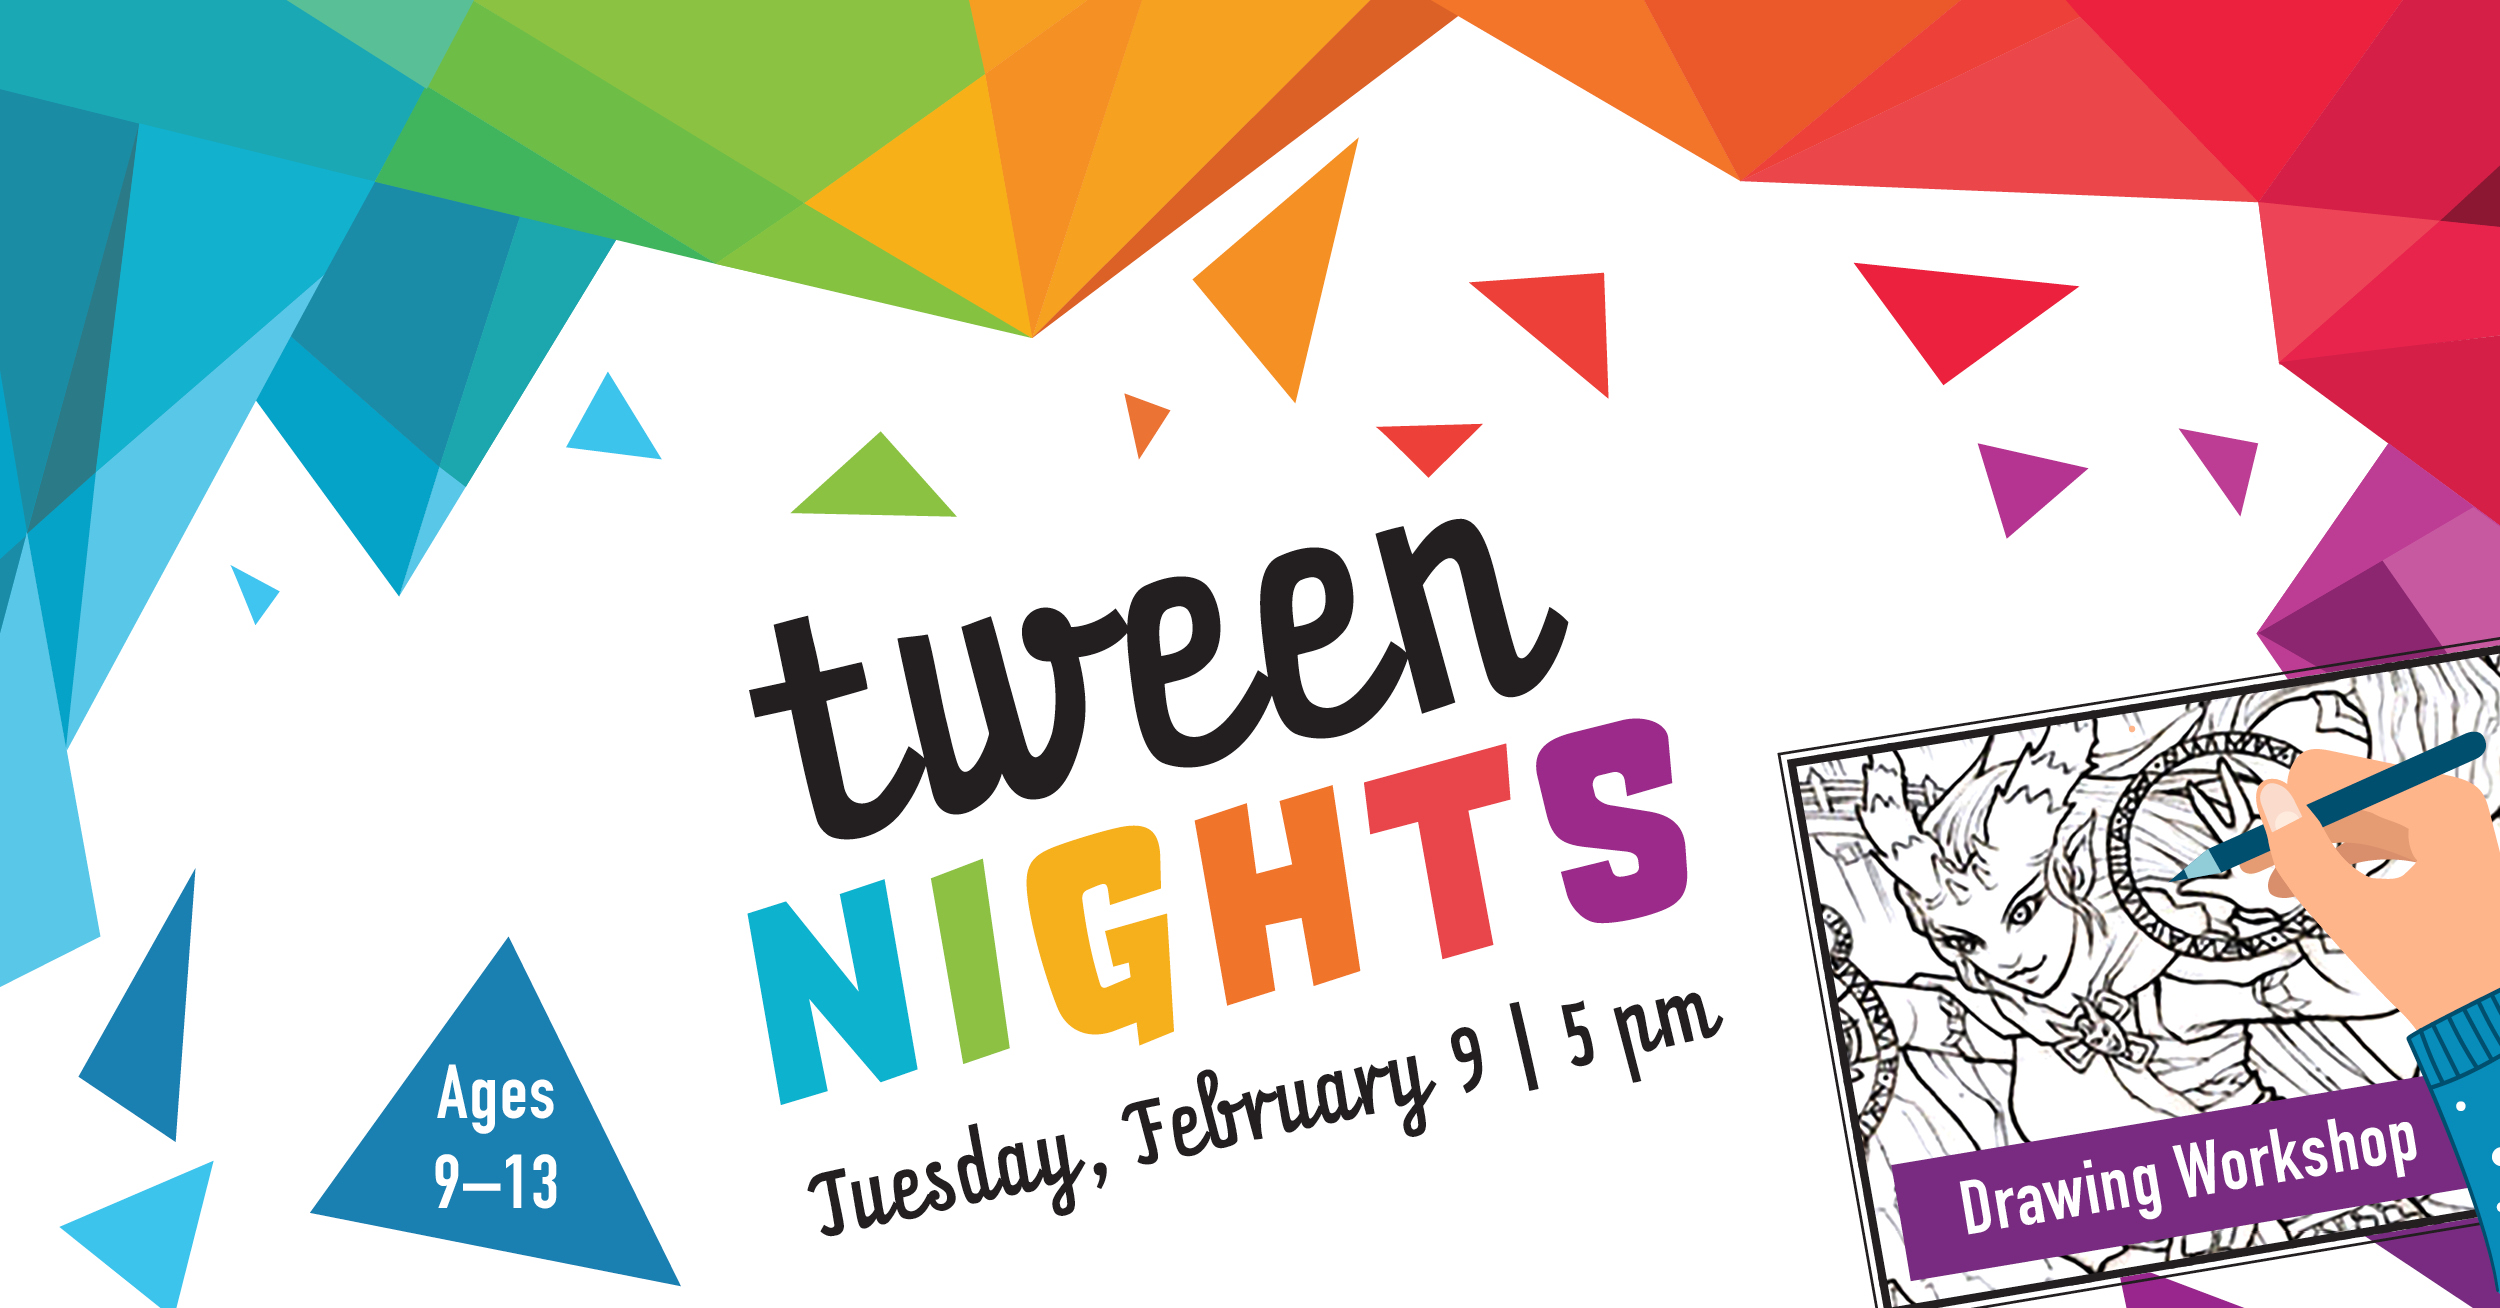 Teen Nights Drawing Workshop ages 9-13 Tuesday, February 9 at 5pm